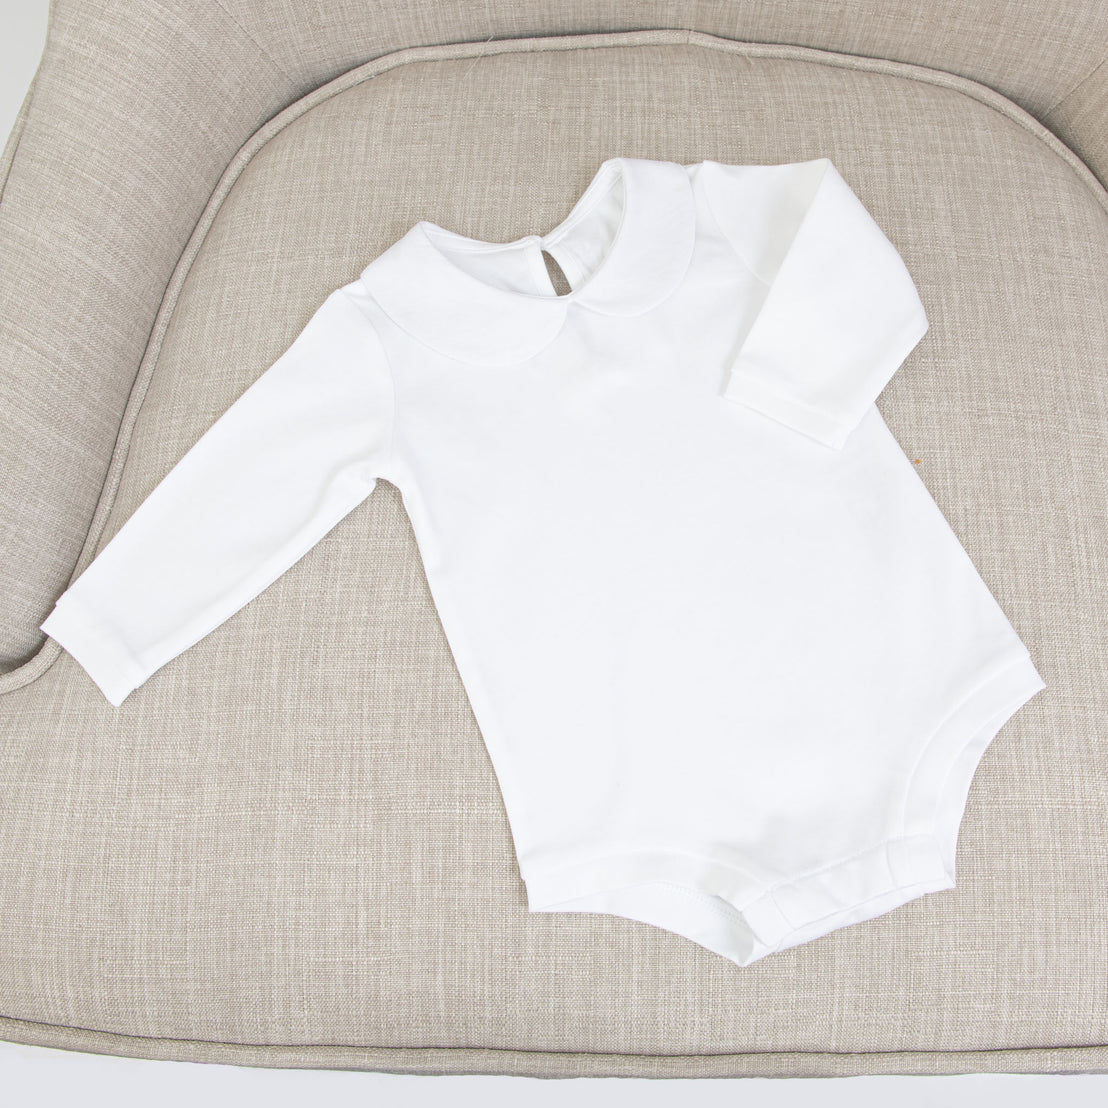 The white onesie, included in the Isla Bubble Skirt Set, lies flat on a textured beige chair.